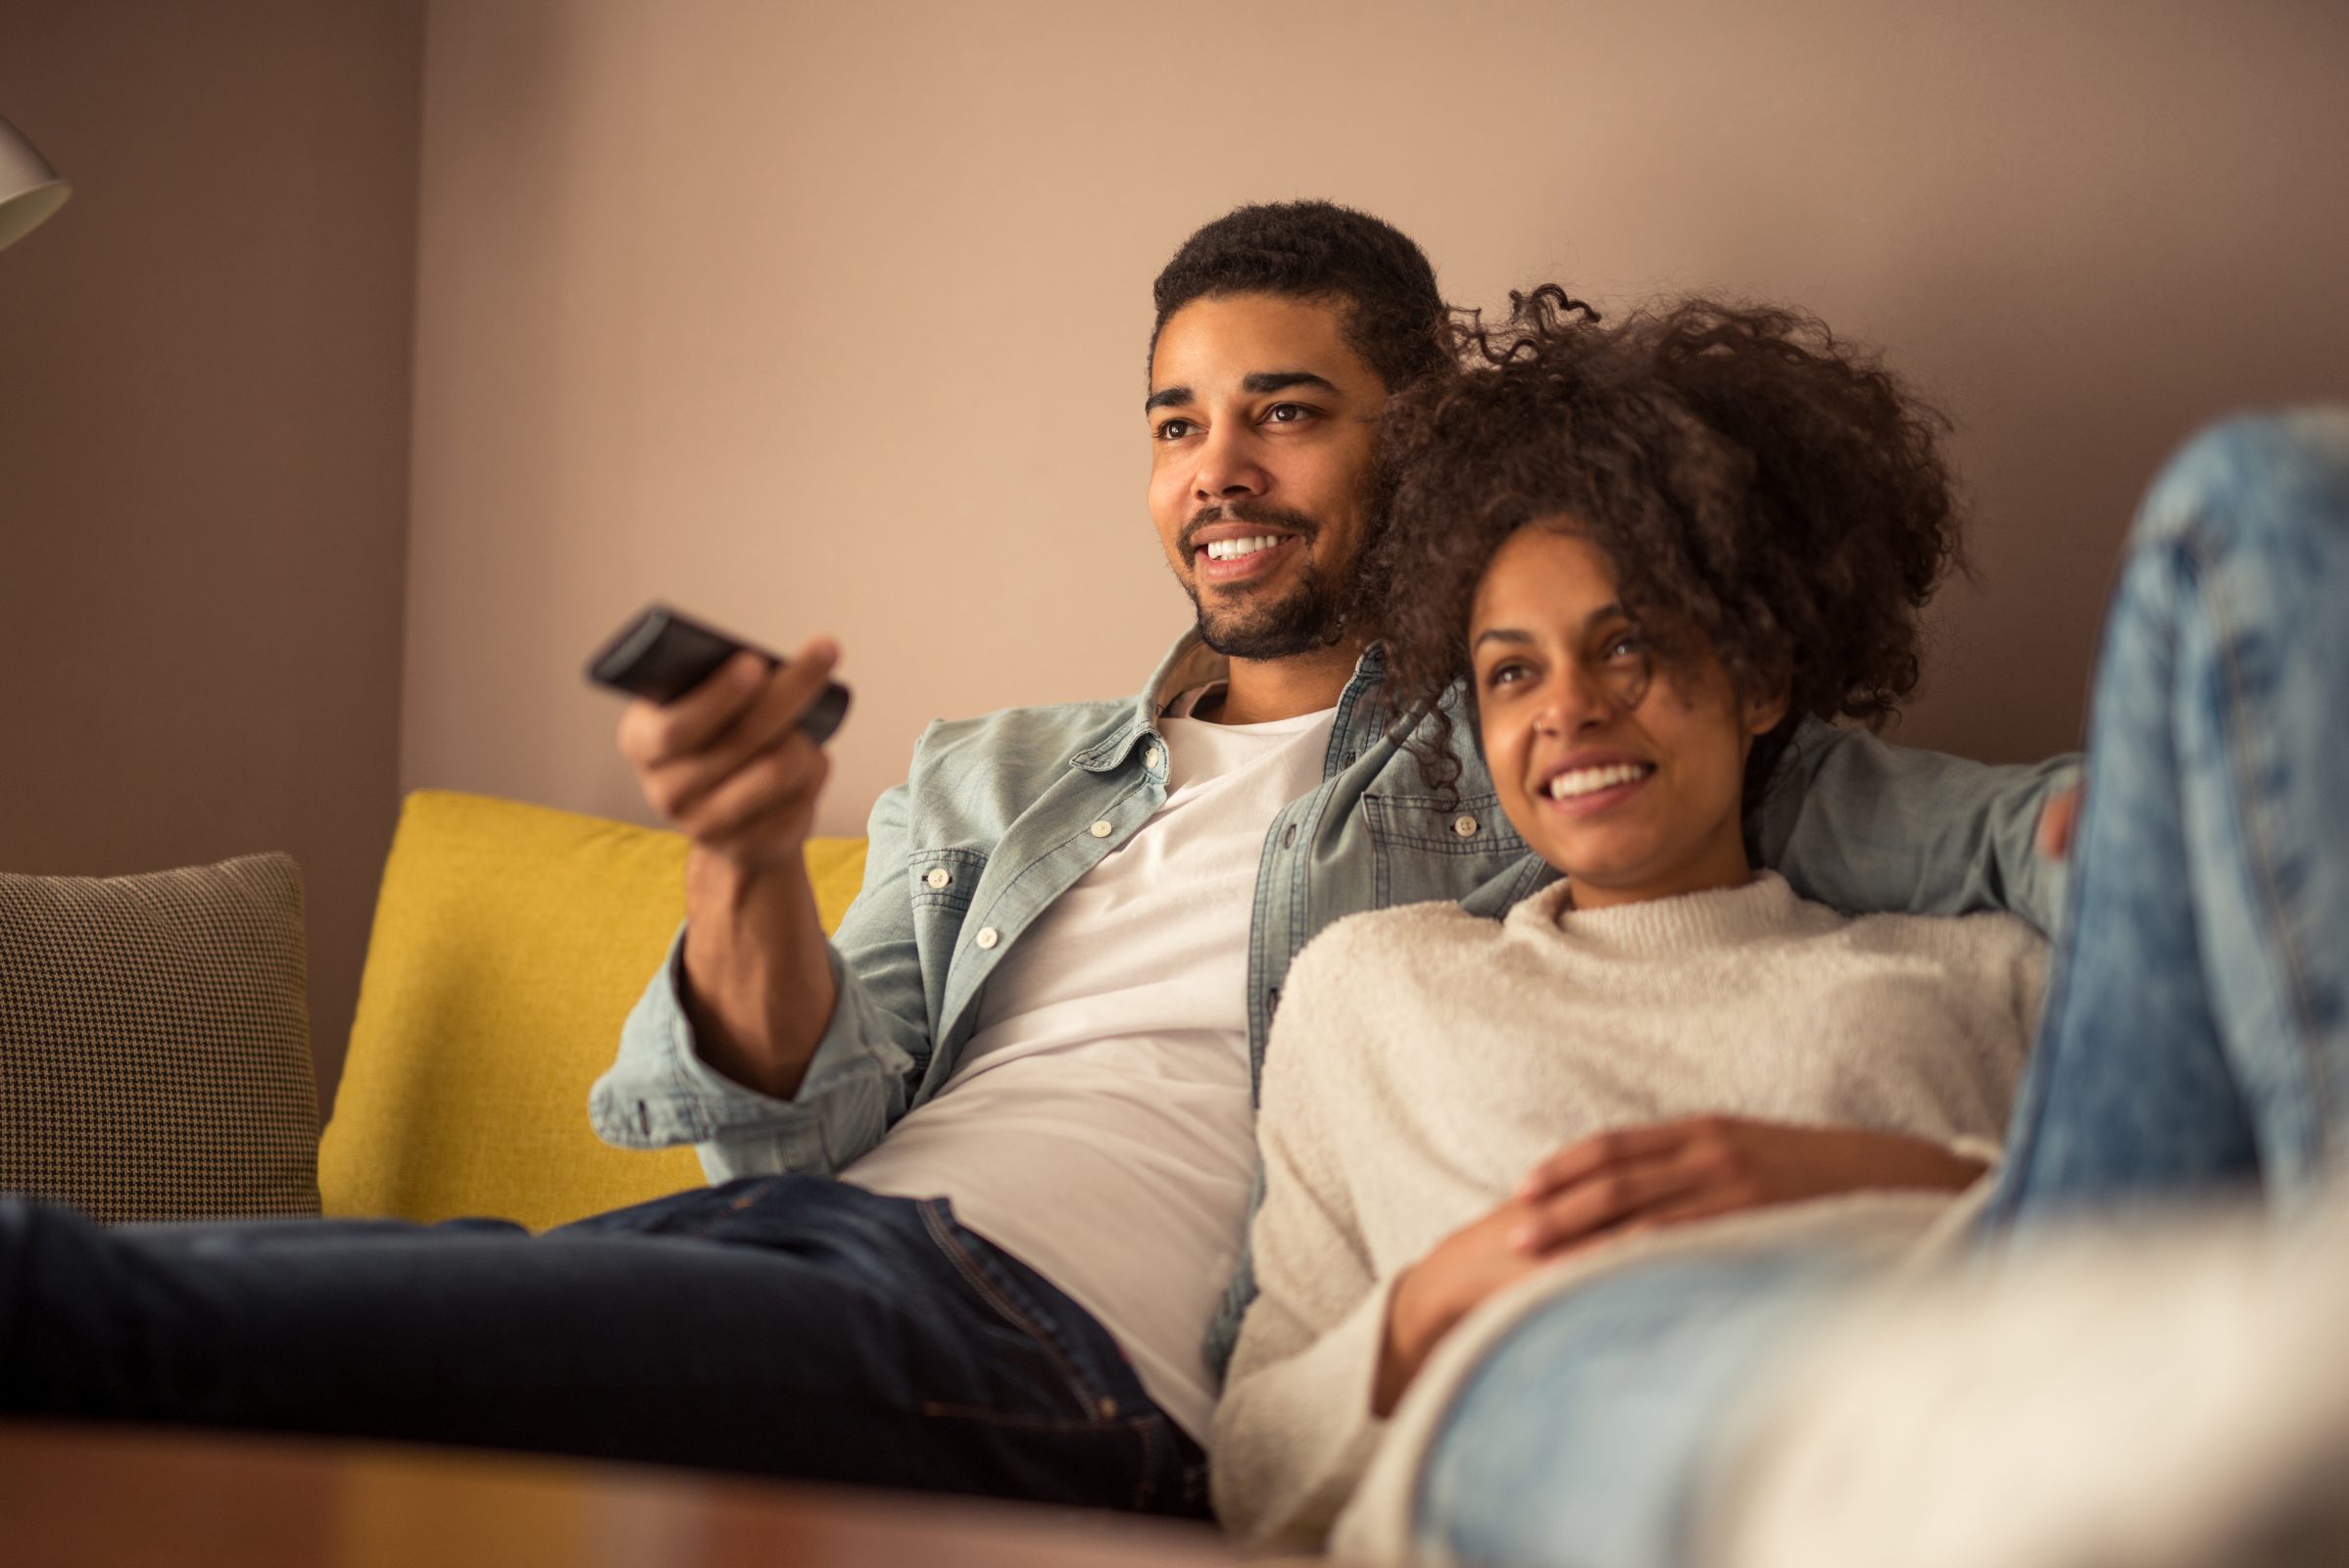 Man and woman watch TV on couch with remote control in hand